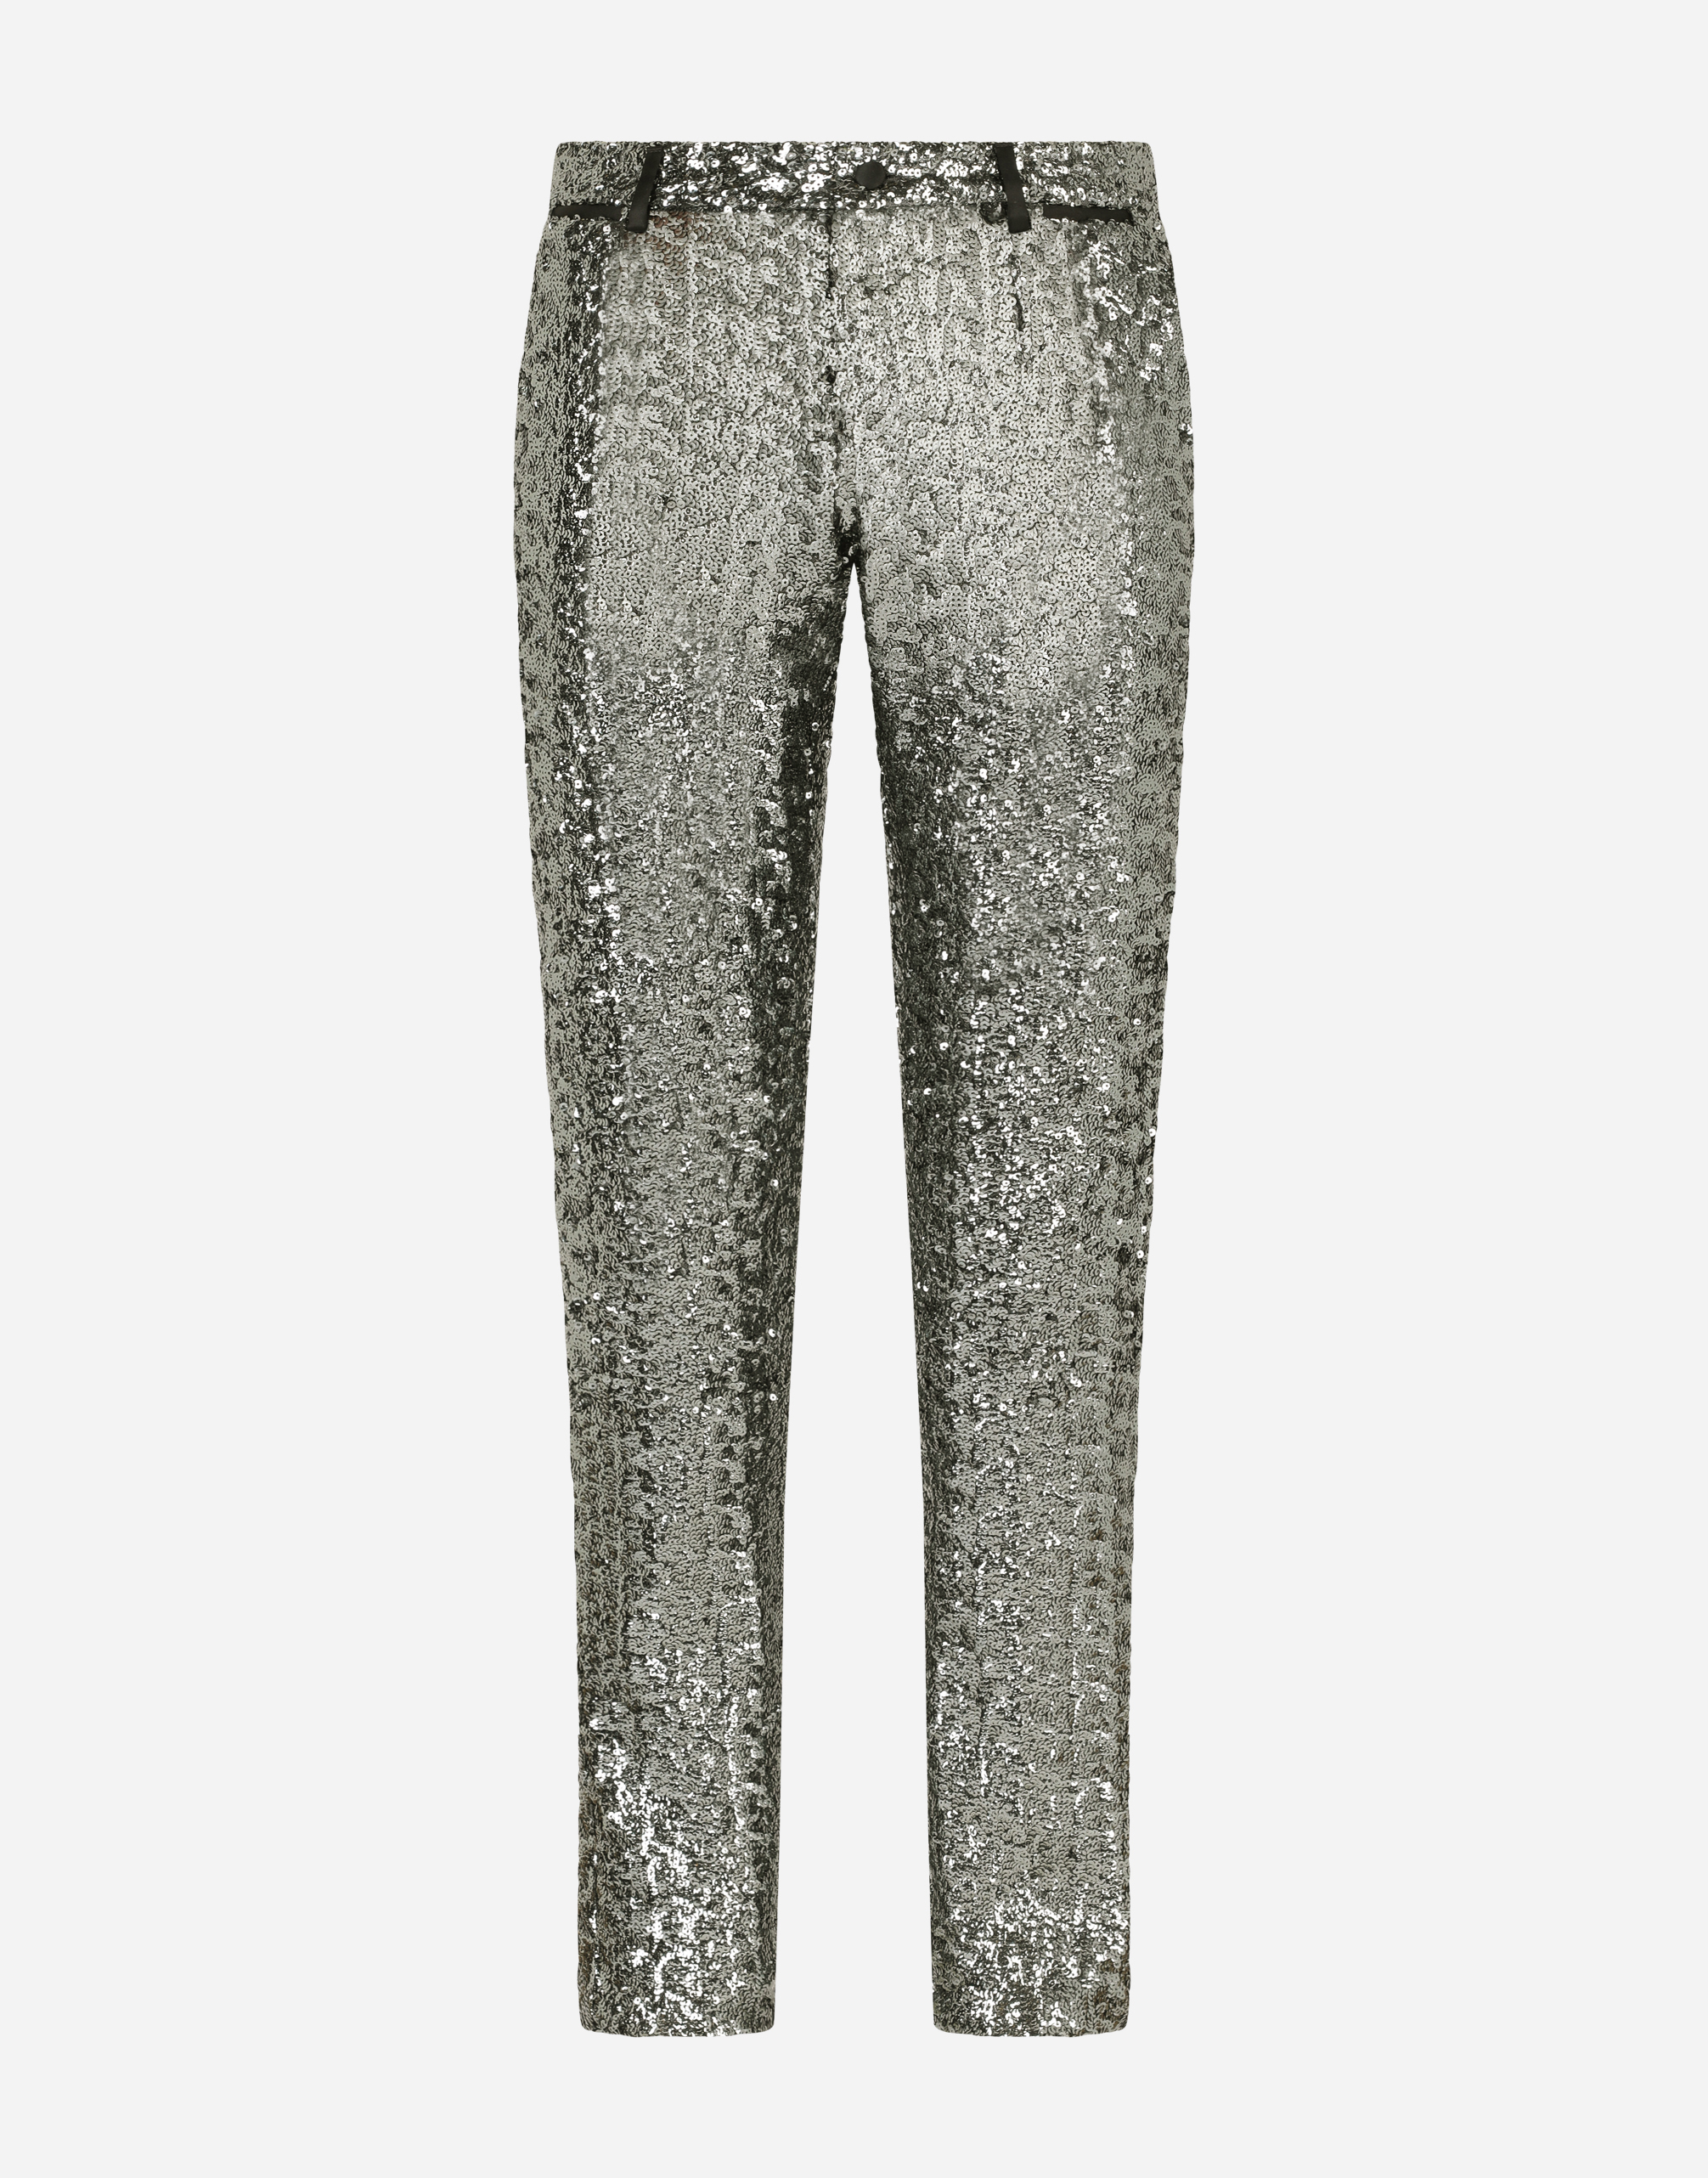 Tailored sequined pants in Grey